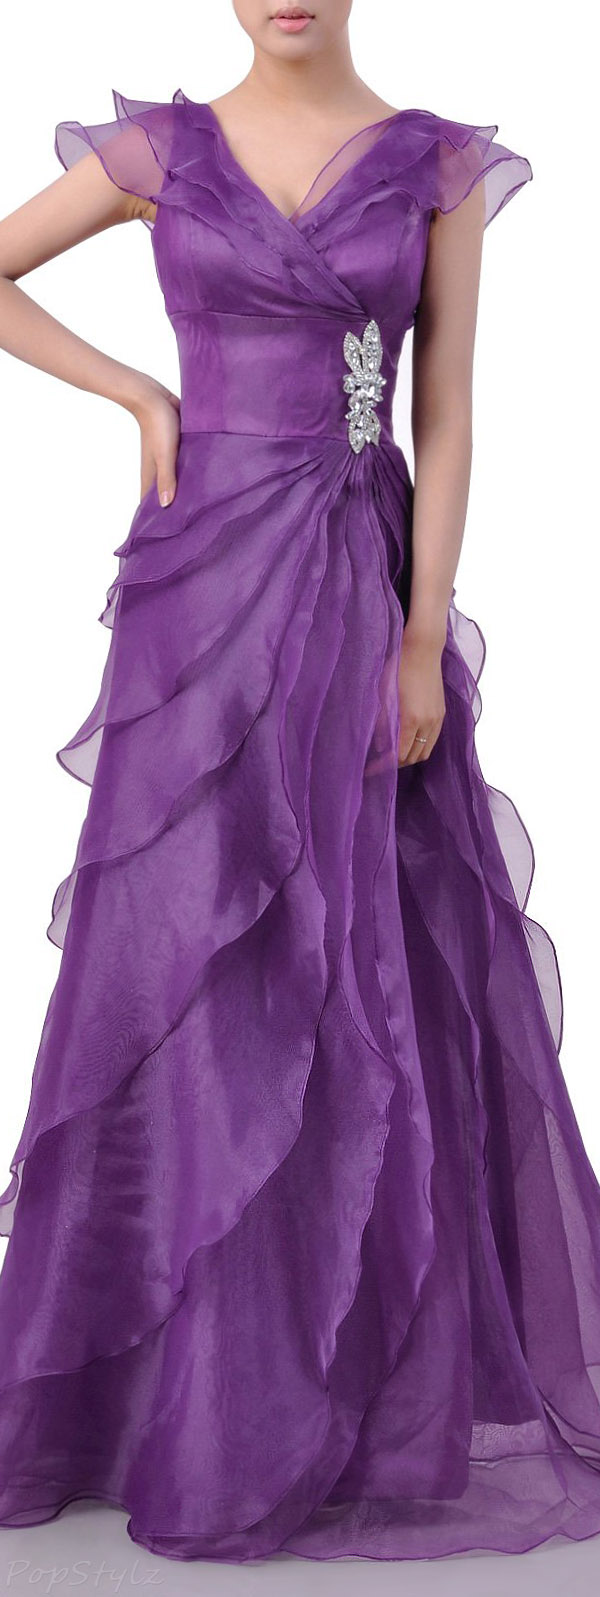 Adorona Long A-Line Ruffled Formal Evening Gown